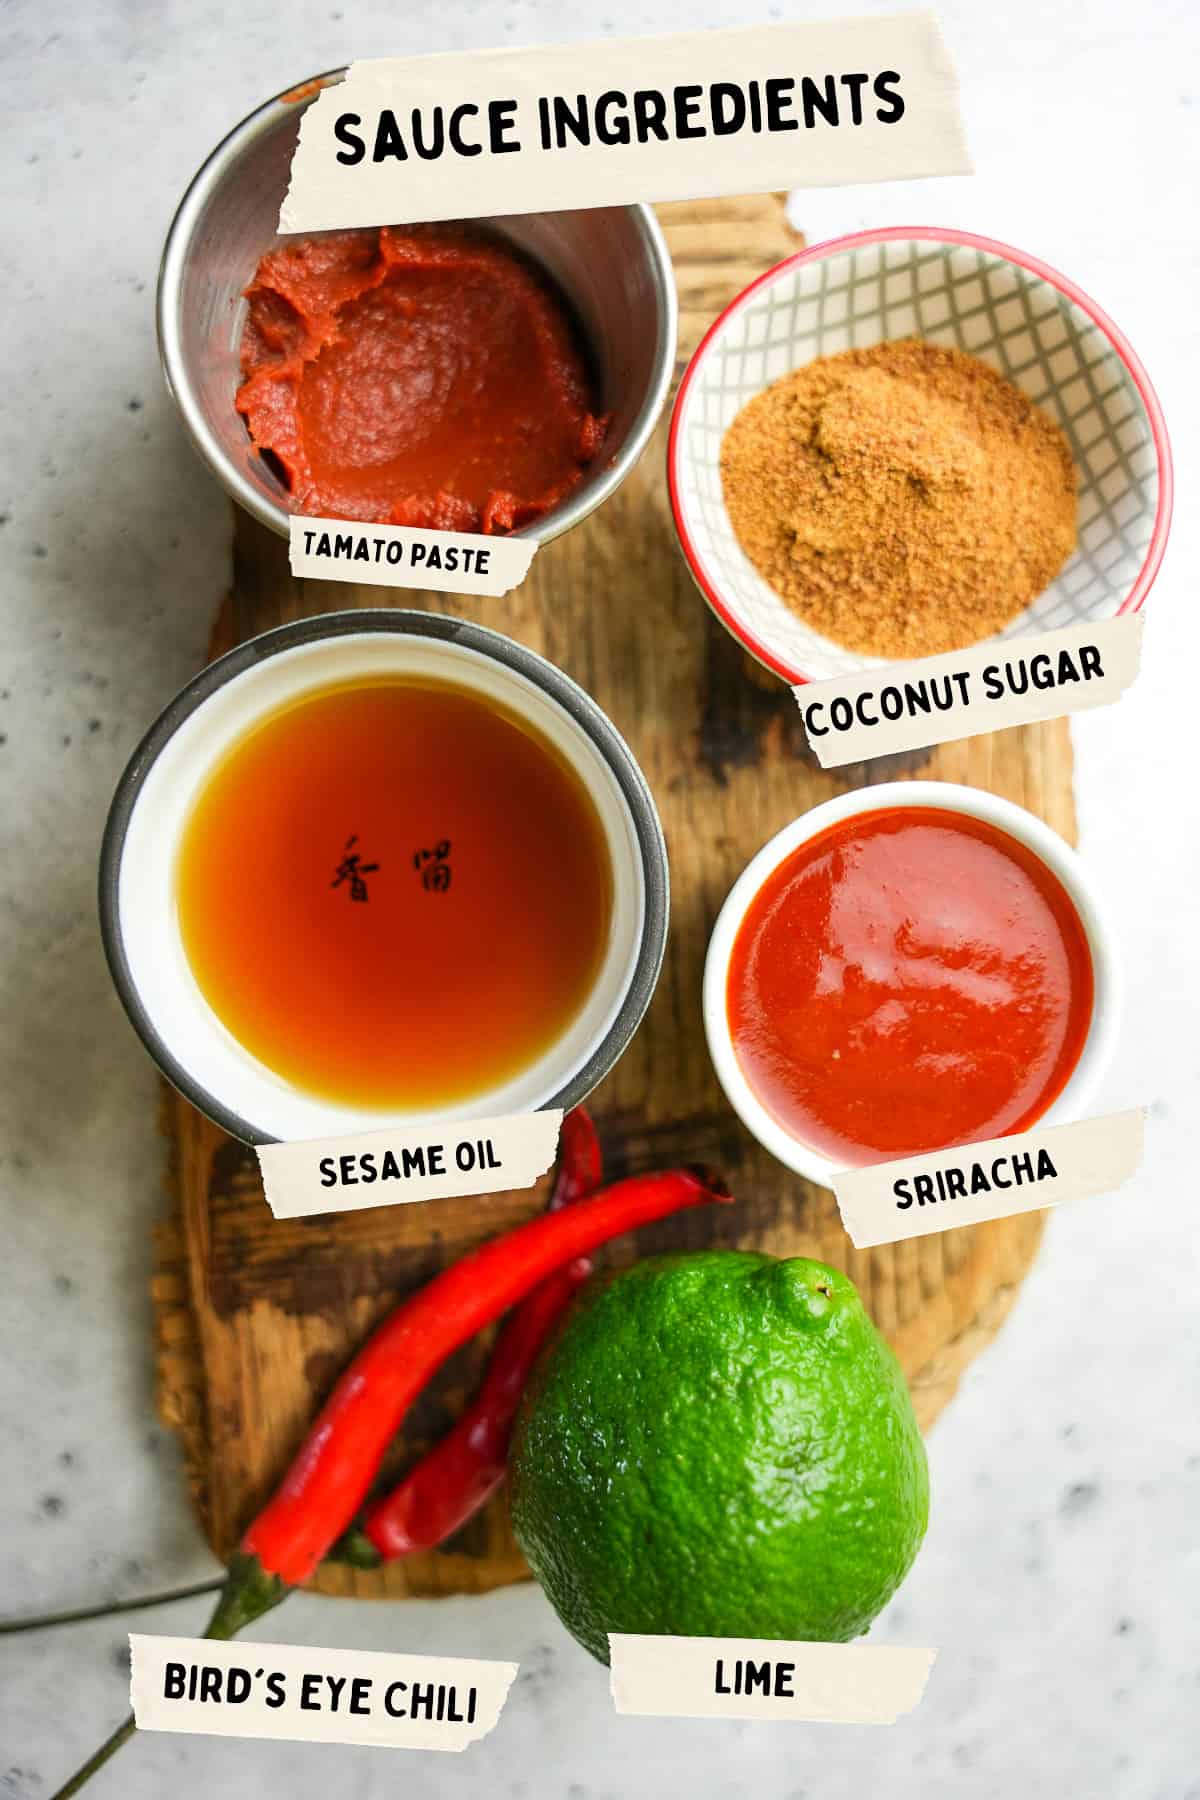 Sauce ingredients are laid out on a wooden board.